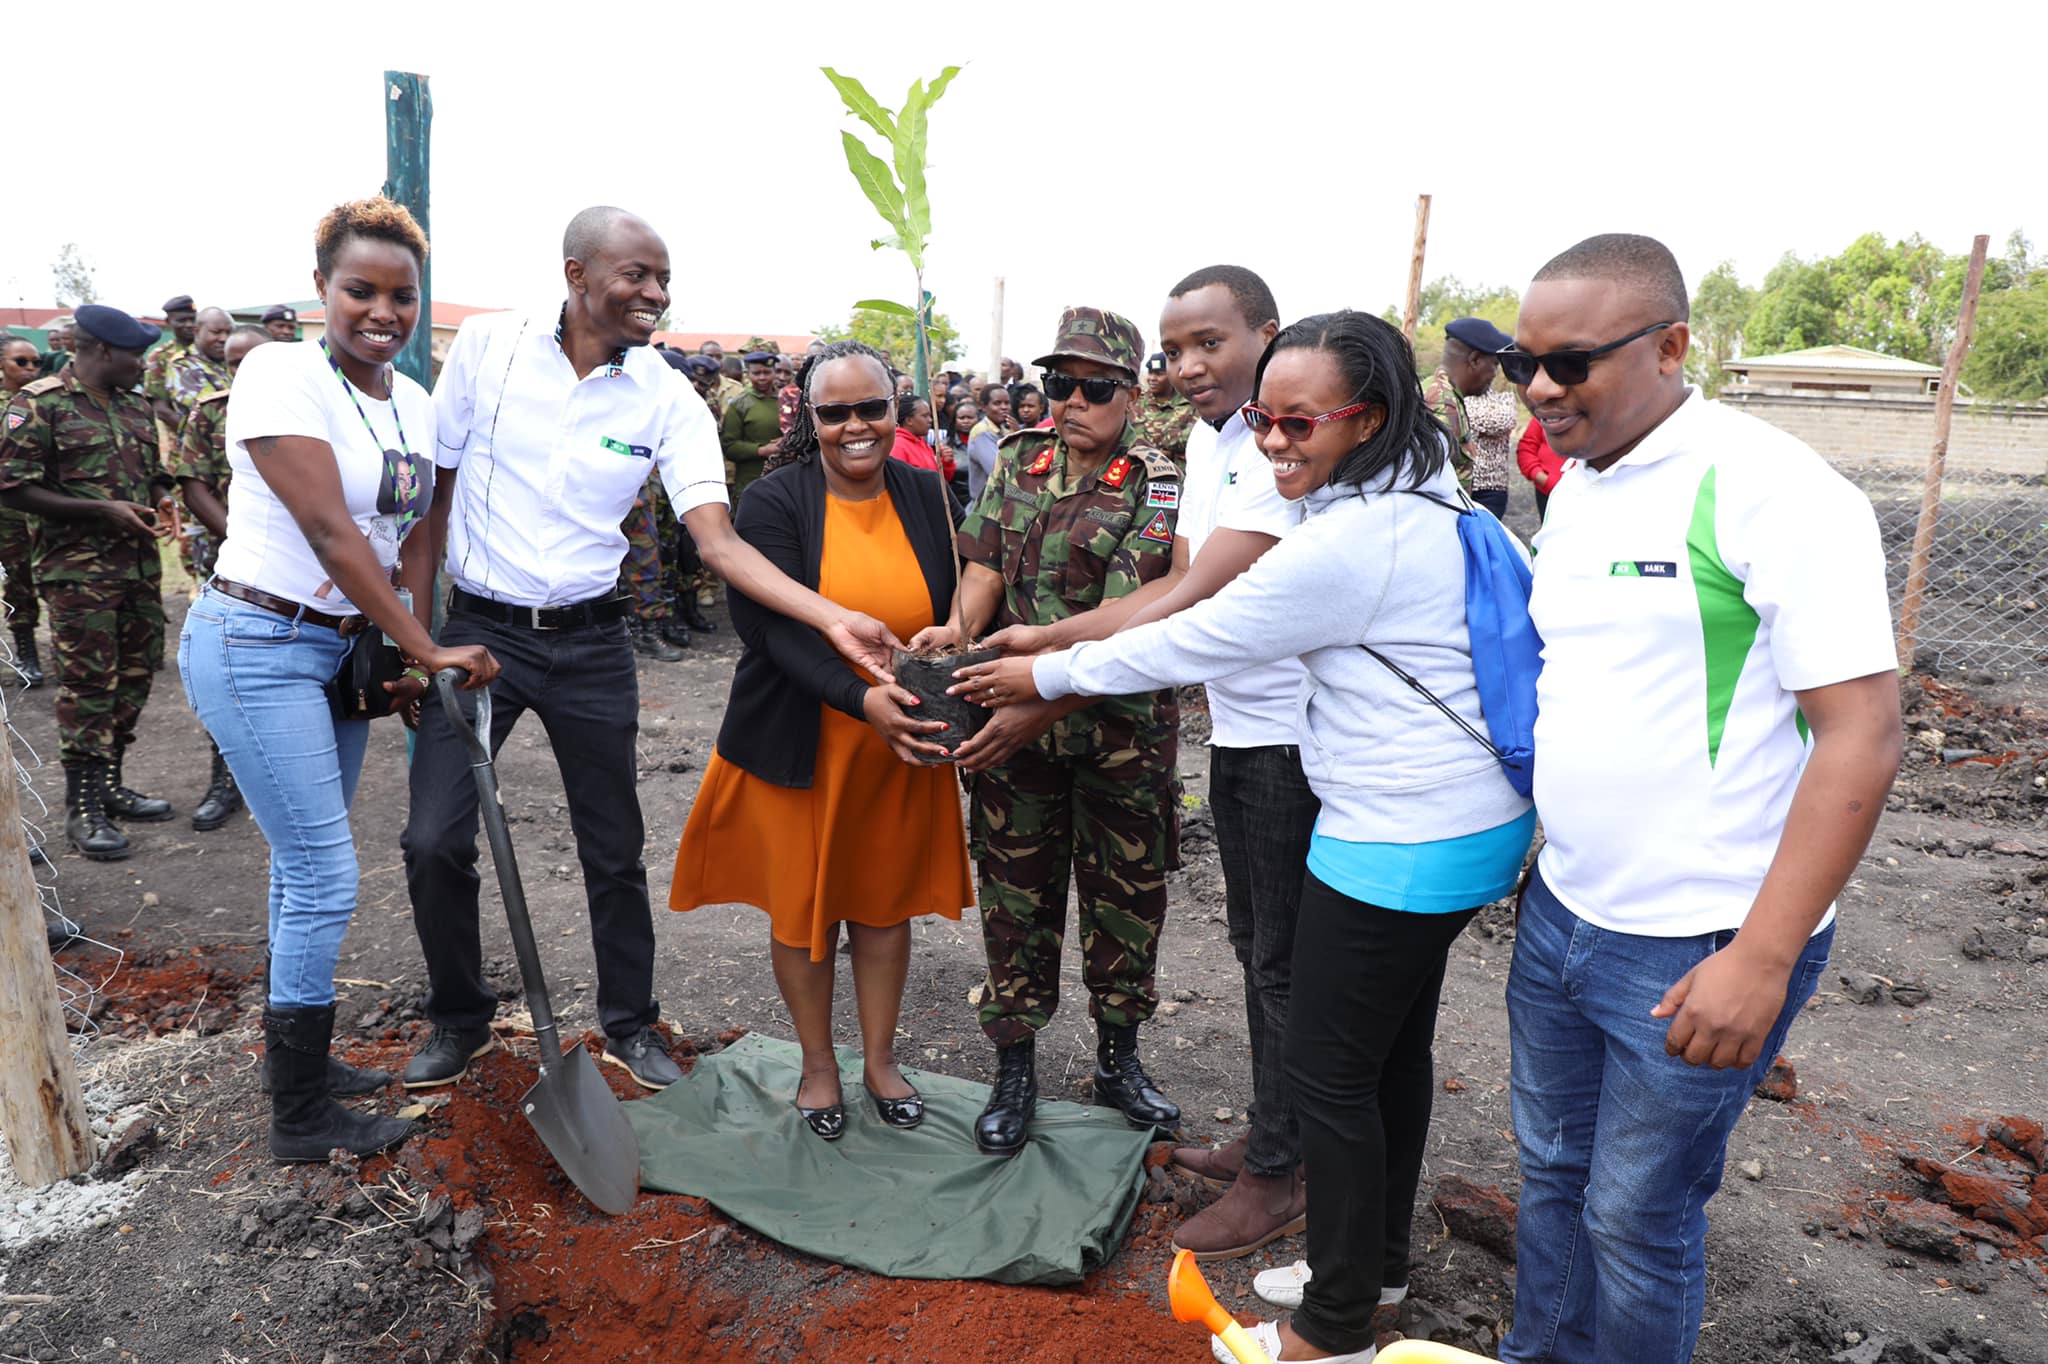 TREE PLANTING EXERCISE IN PARTNERSHIP WITH KENYA COMMERCIAL BANK